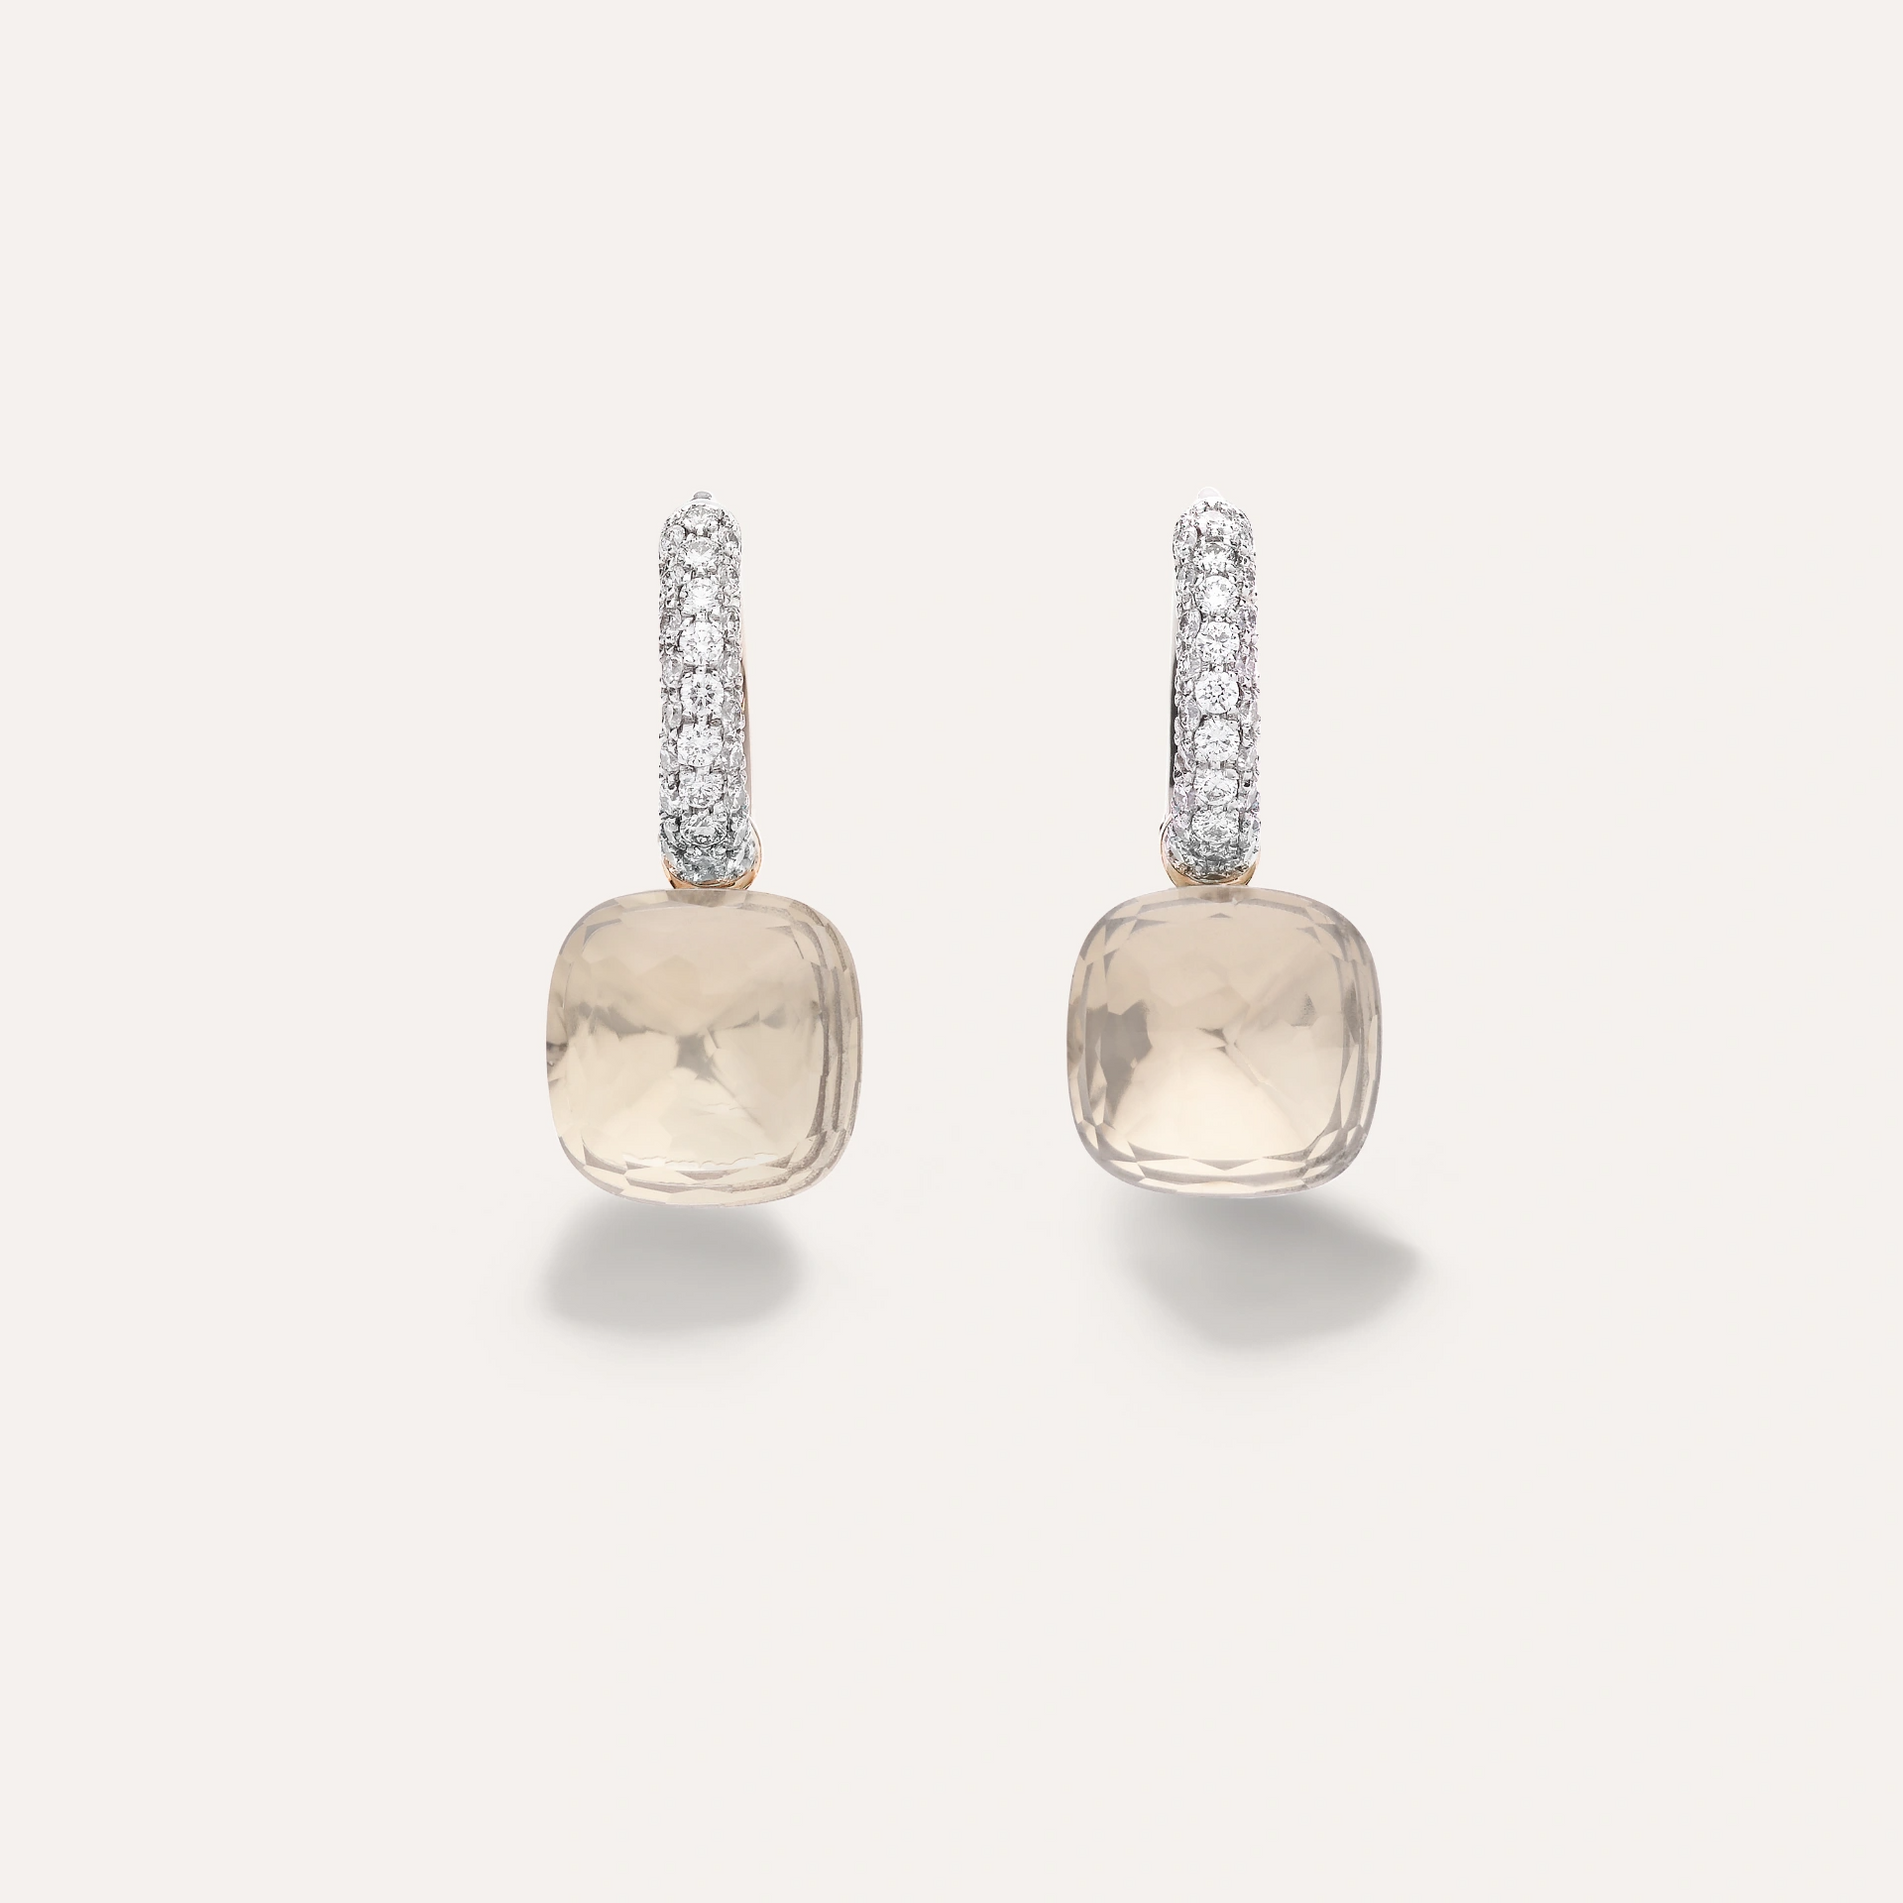 White topaz and diamond drop earring from the pomellato nudo collection set in rose and white gold